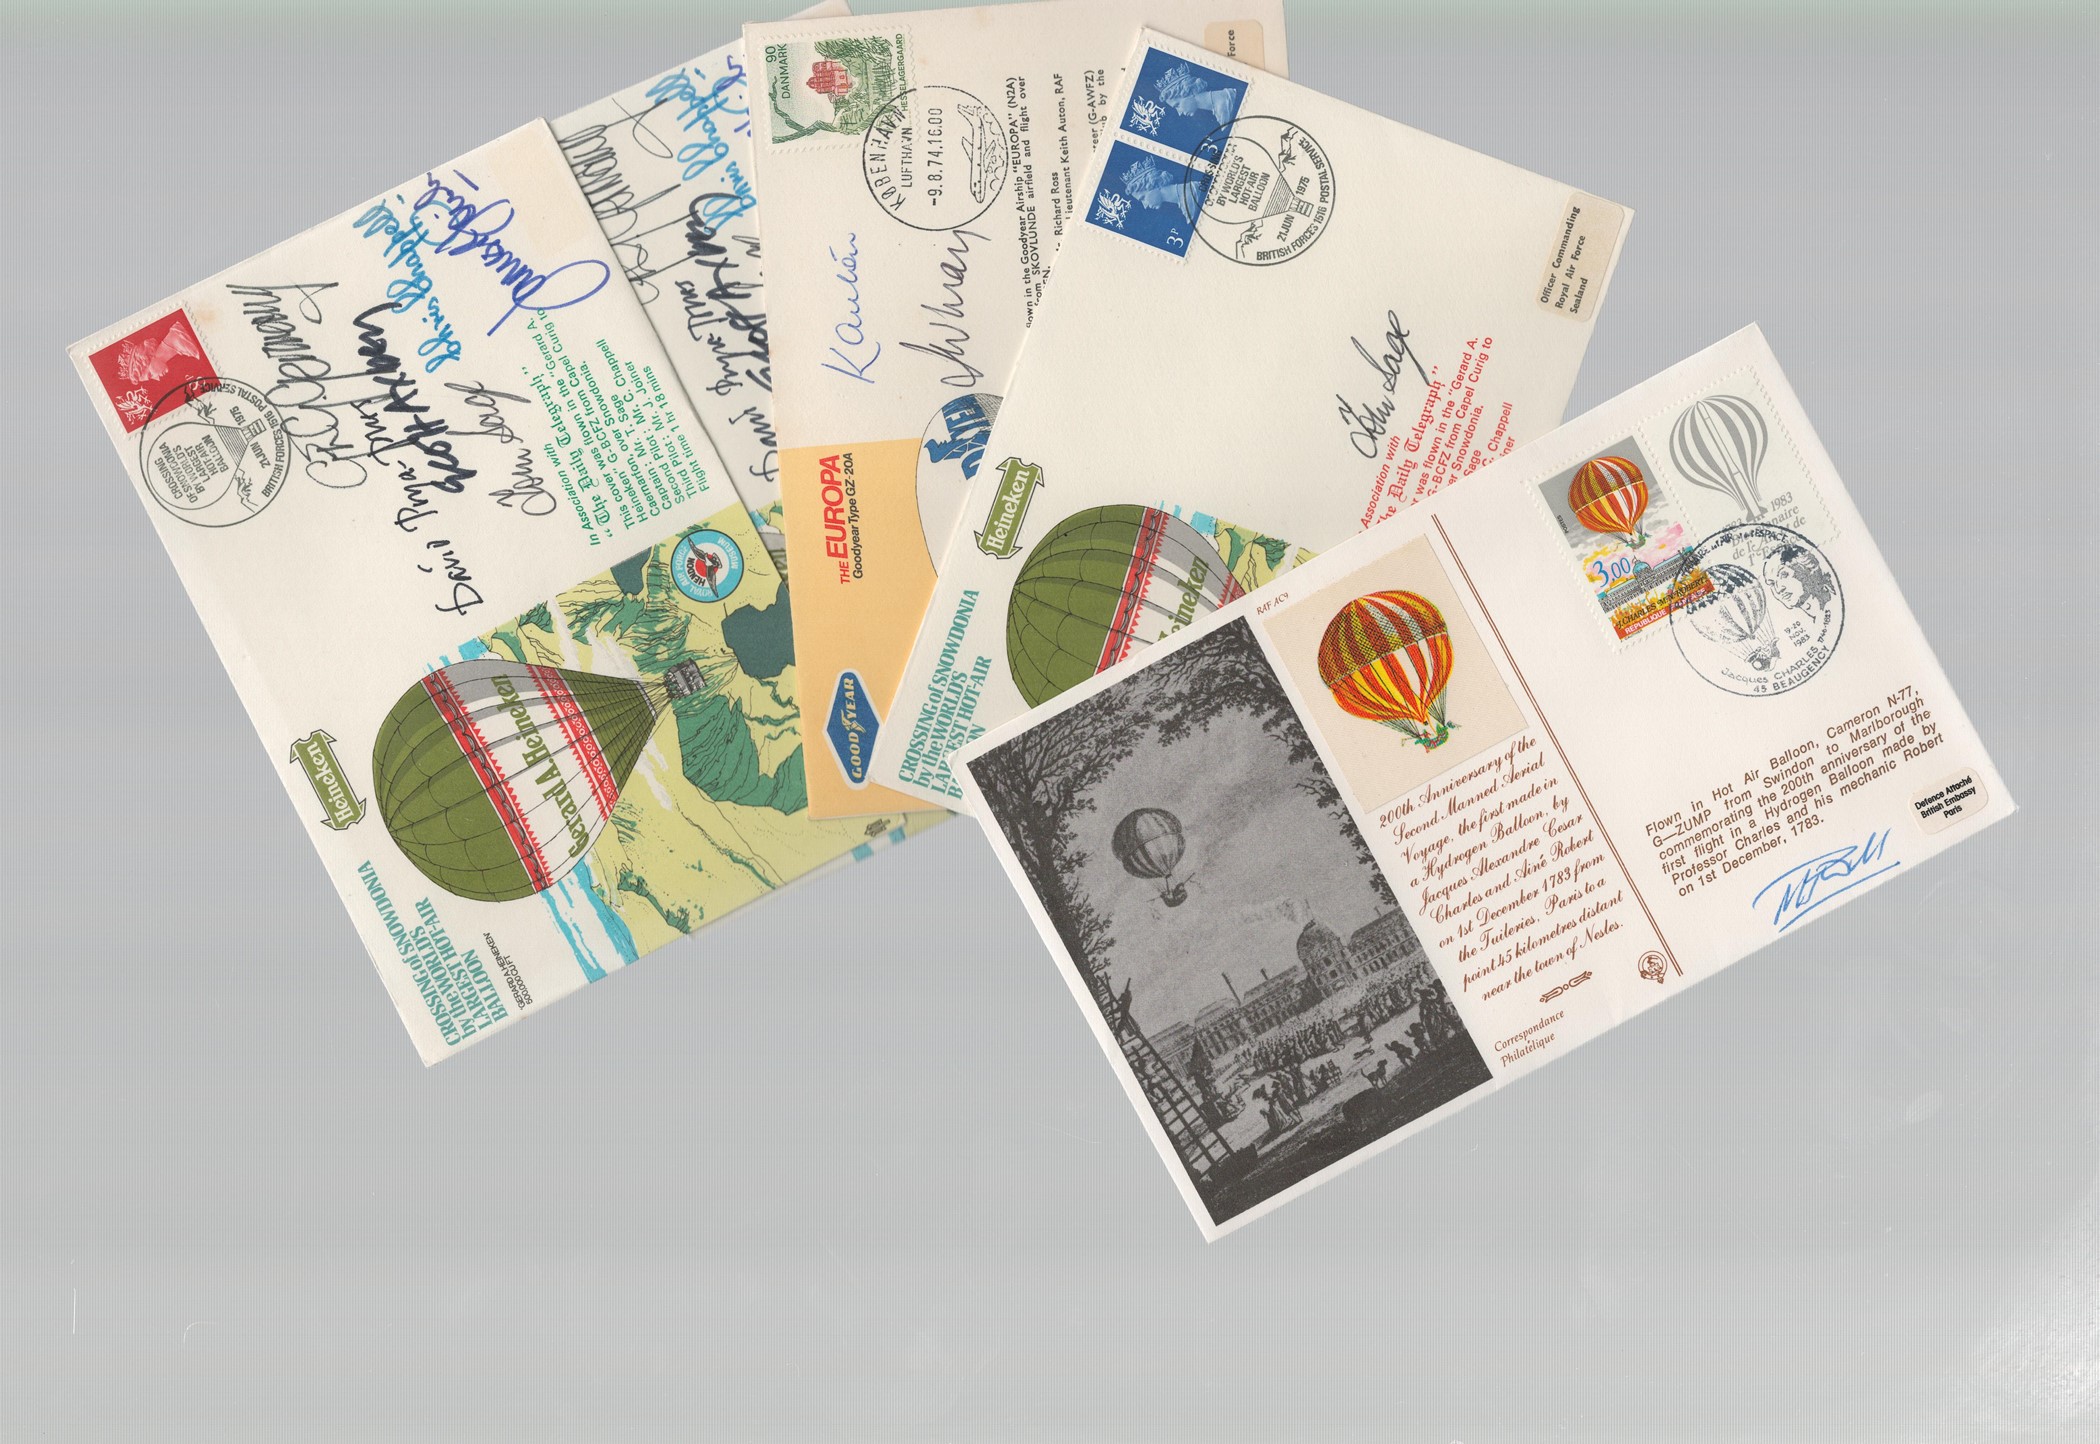 Air Balloons Collection of 16 FDCs signatures include T Godfrey, Tony Gowin Jones, W W Ballantyne, - Image 5 of 6